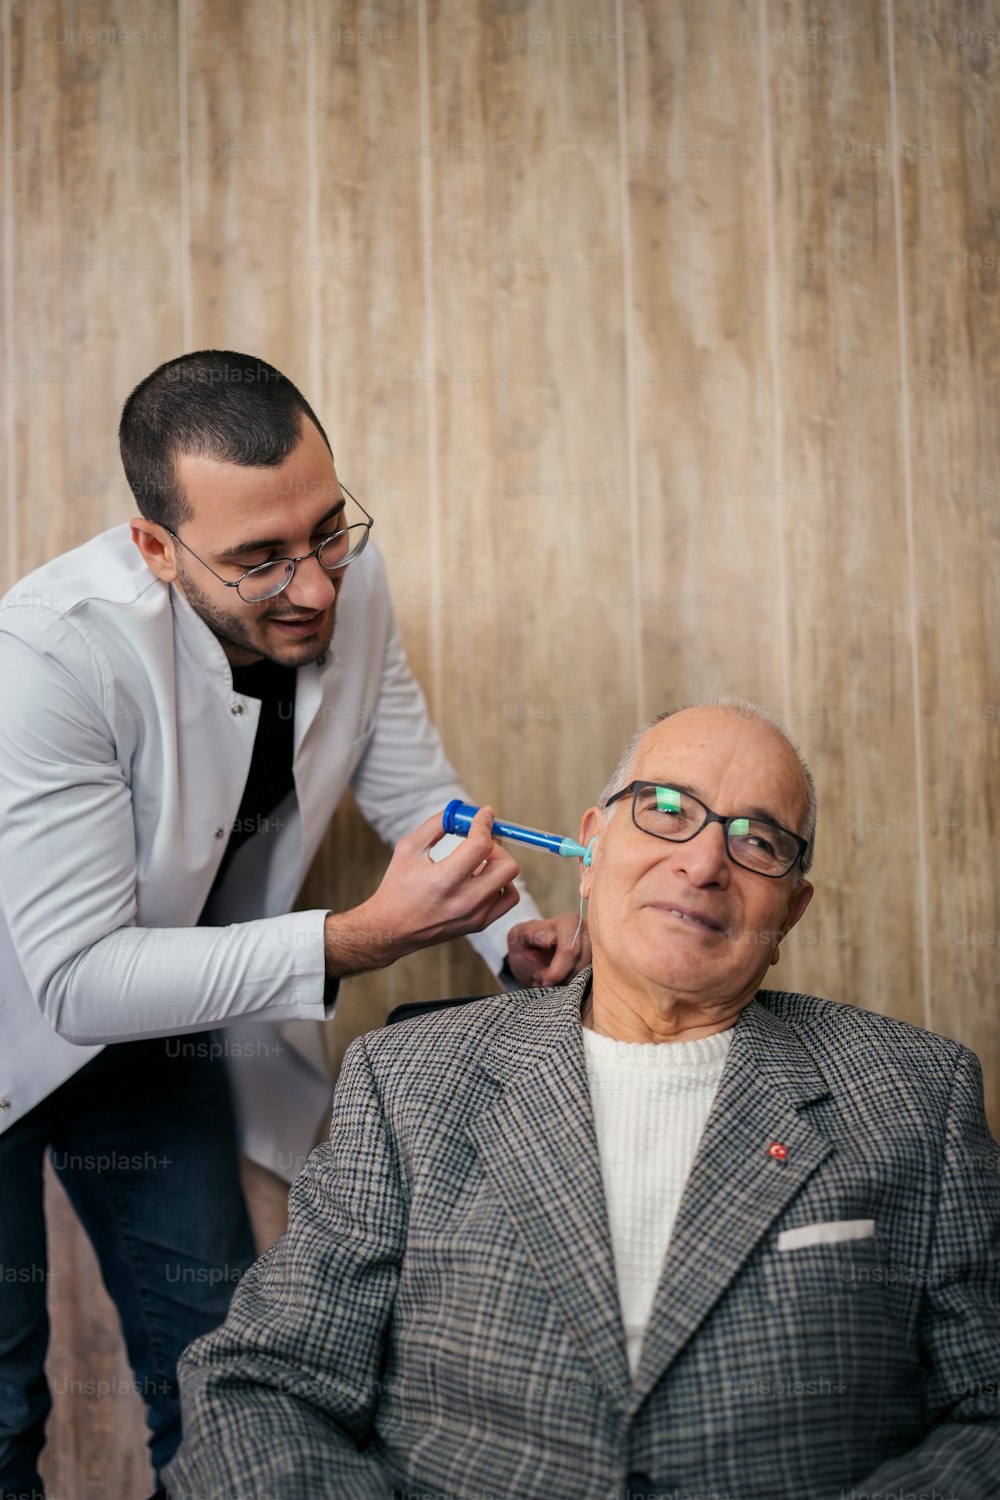 a man getting his teeth brushed by a man in a suit